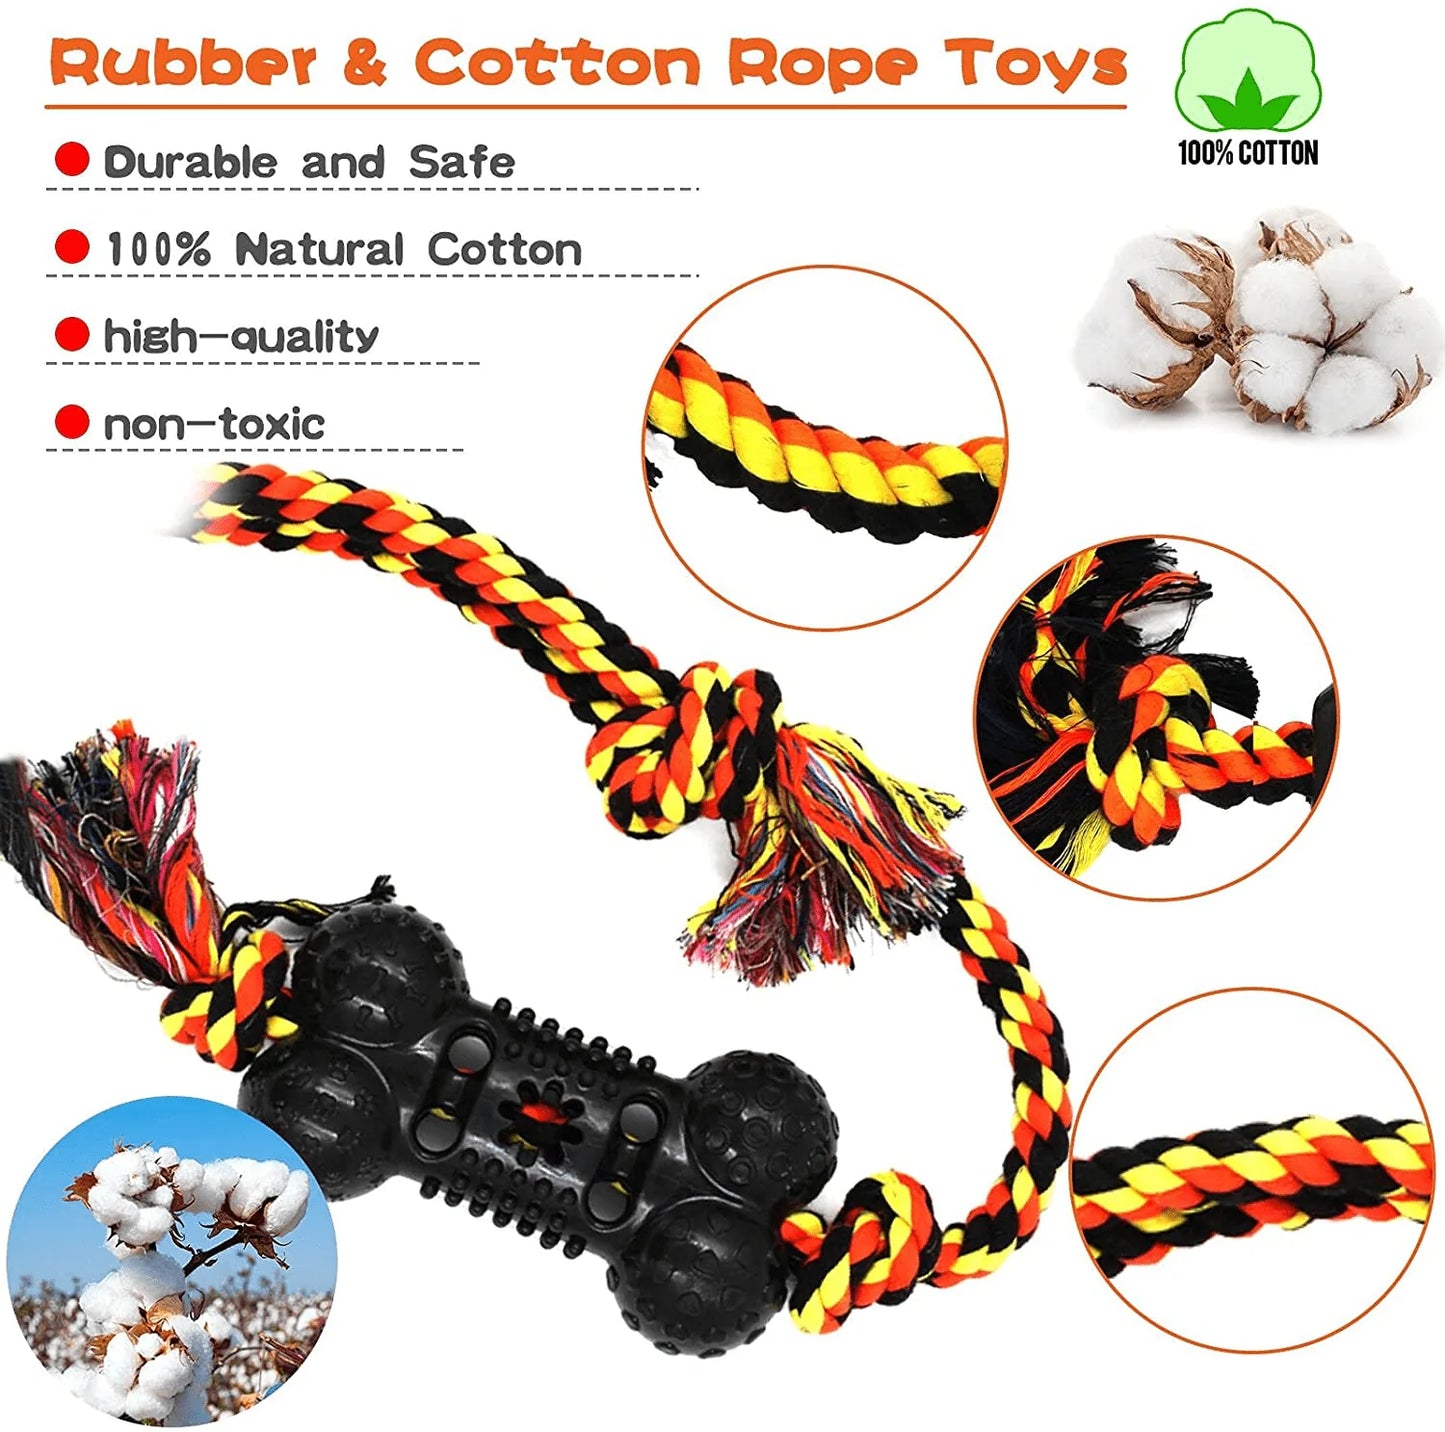 Yipetor Durable Dog Chew Toys 6 Pack, Cotton Rope Rubber Balls Chew Toy, Indestructible, Convex Design for Puppy Small Medium Large Dogs, Tug of War, Fetching, Puppy Teething Toy for Boredom, Gift